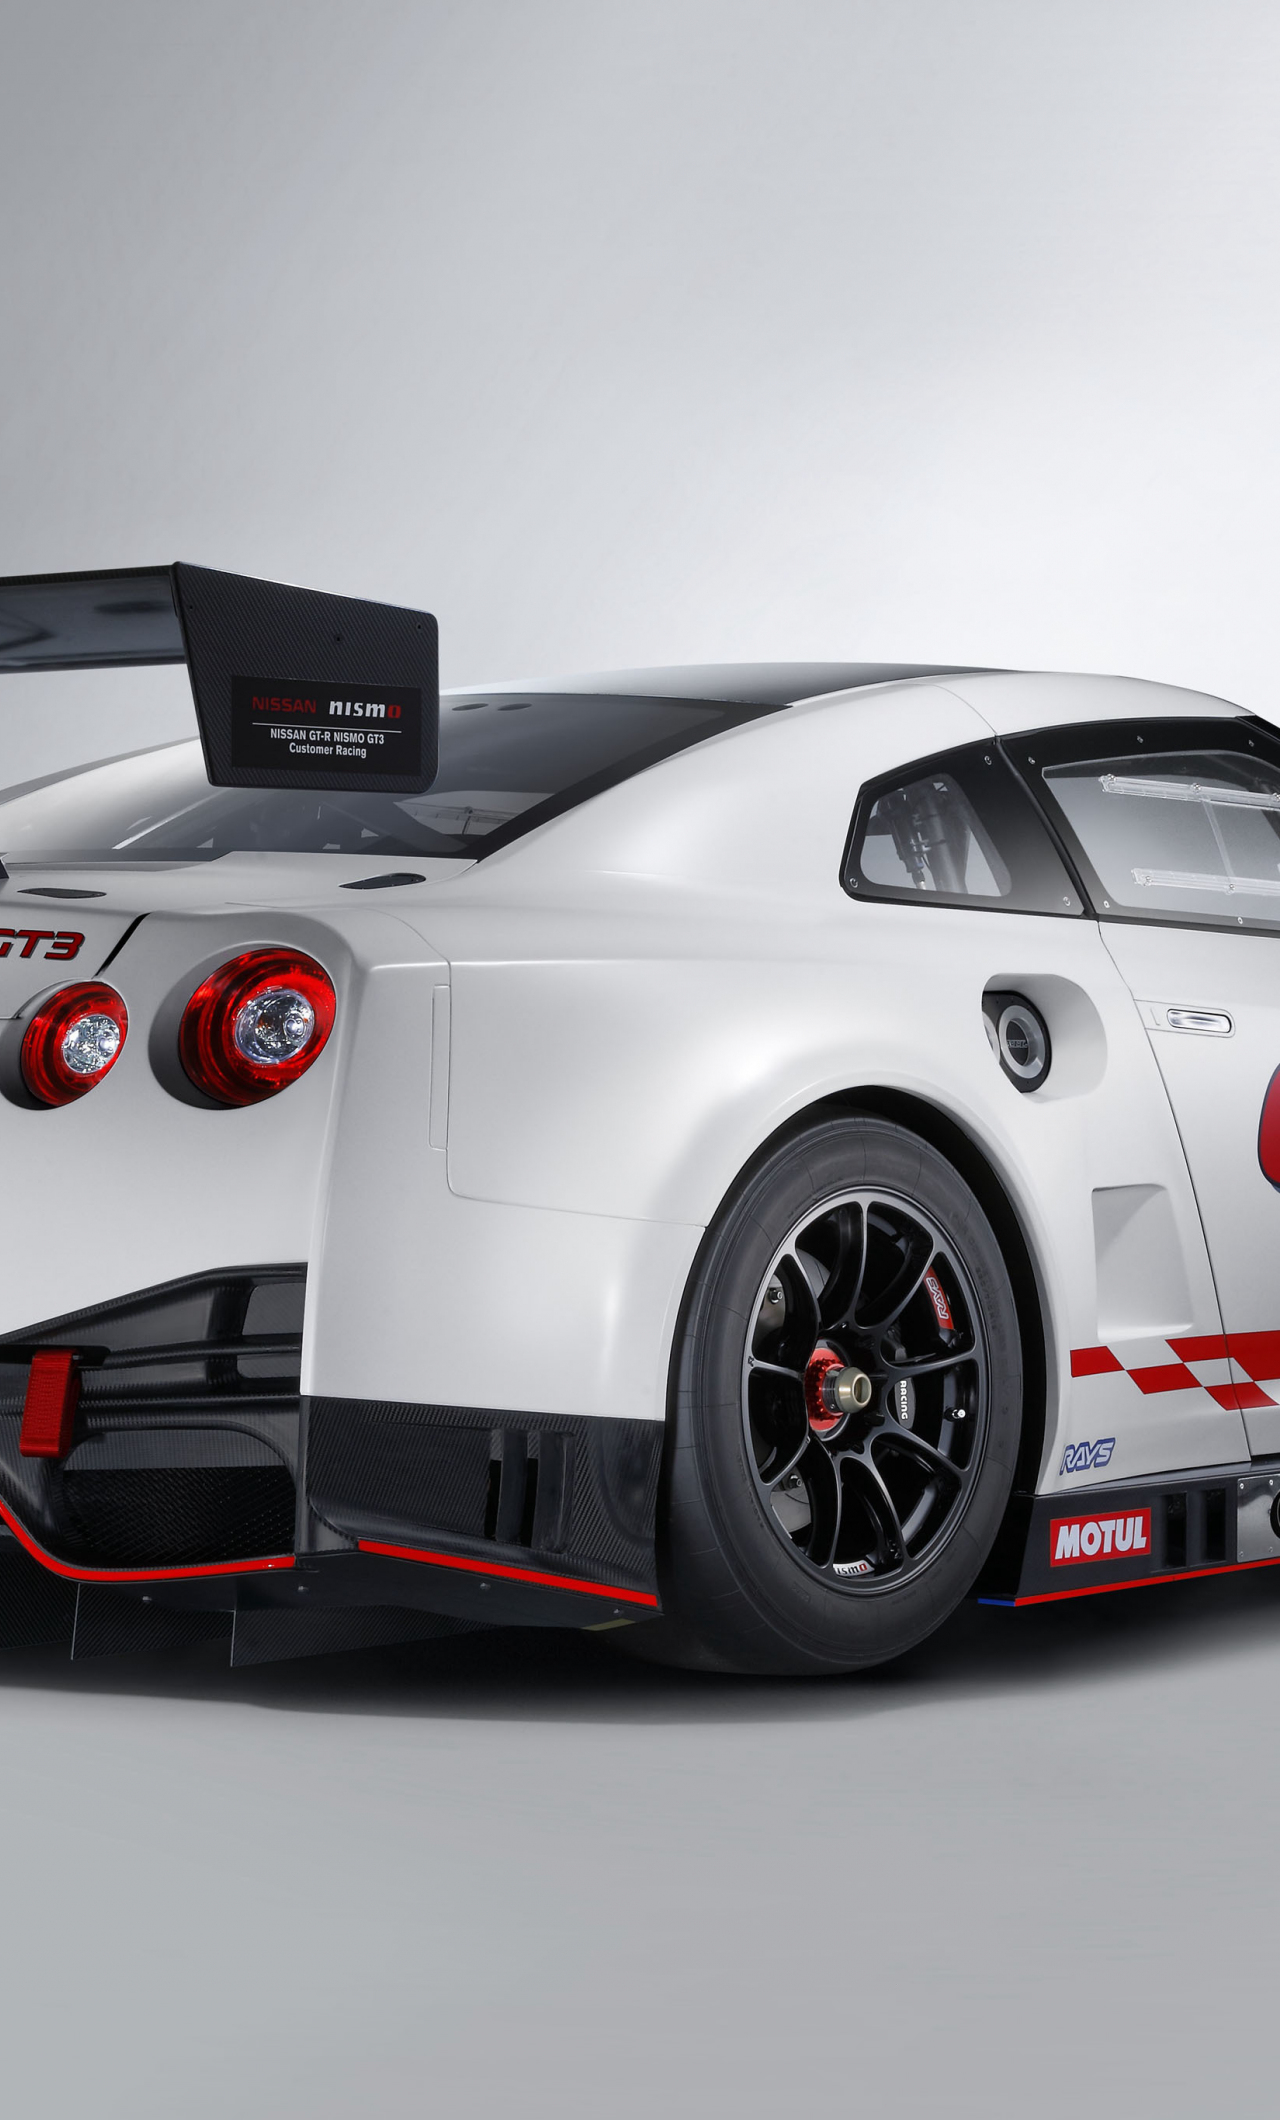 1280x2120 Download 2018, nismo, nissan gt-r nismo gt3, rear wallpaper, iphone 6 plus, hd image, background, 8510